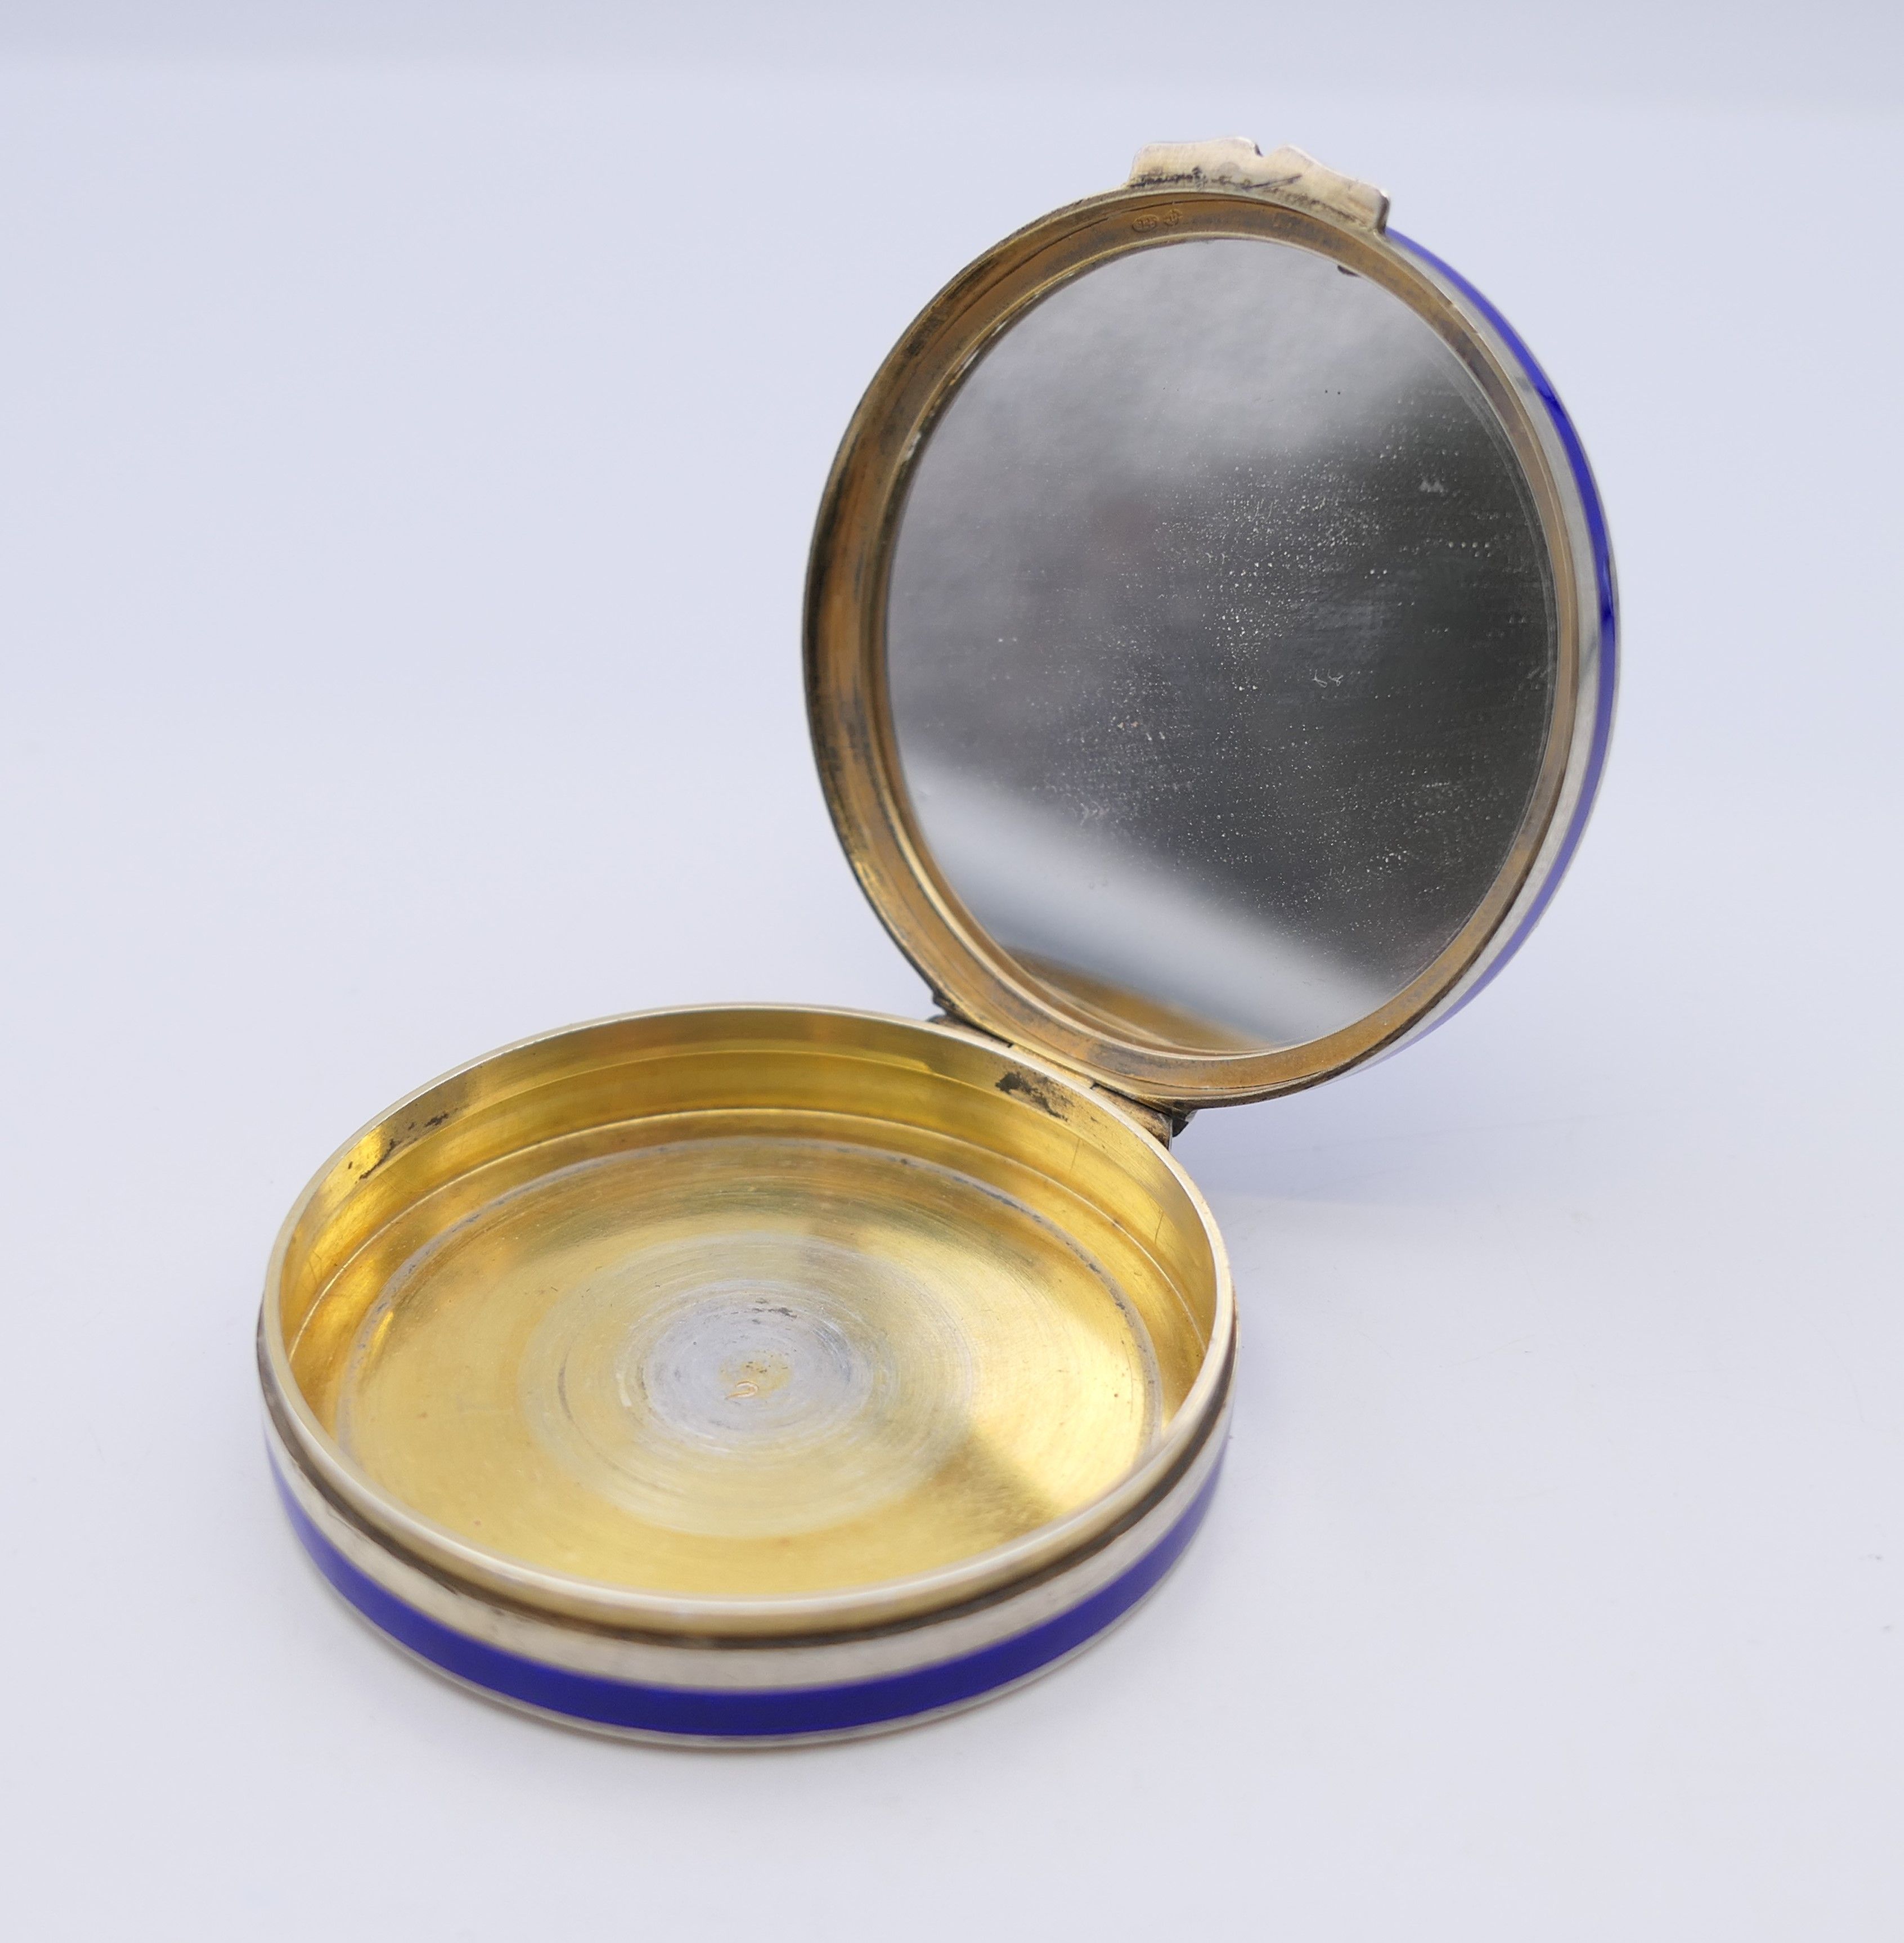 An enamel decorated silver compact. 5 cm diameter. - Image 4 of 6